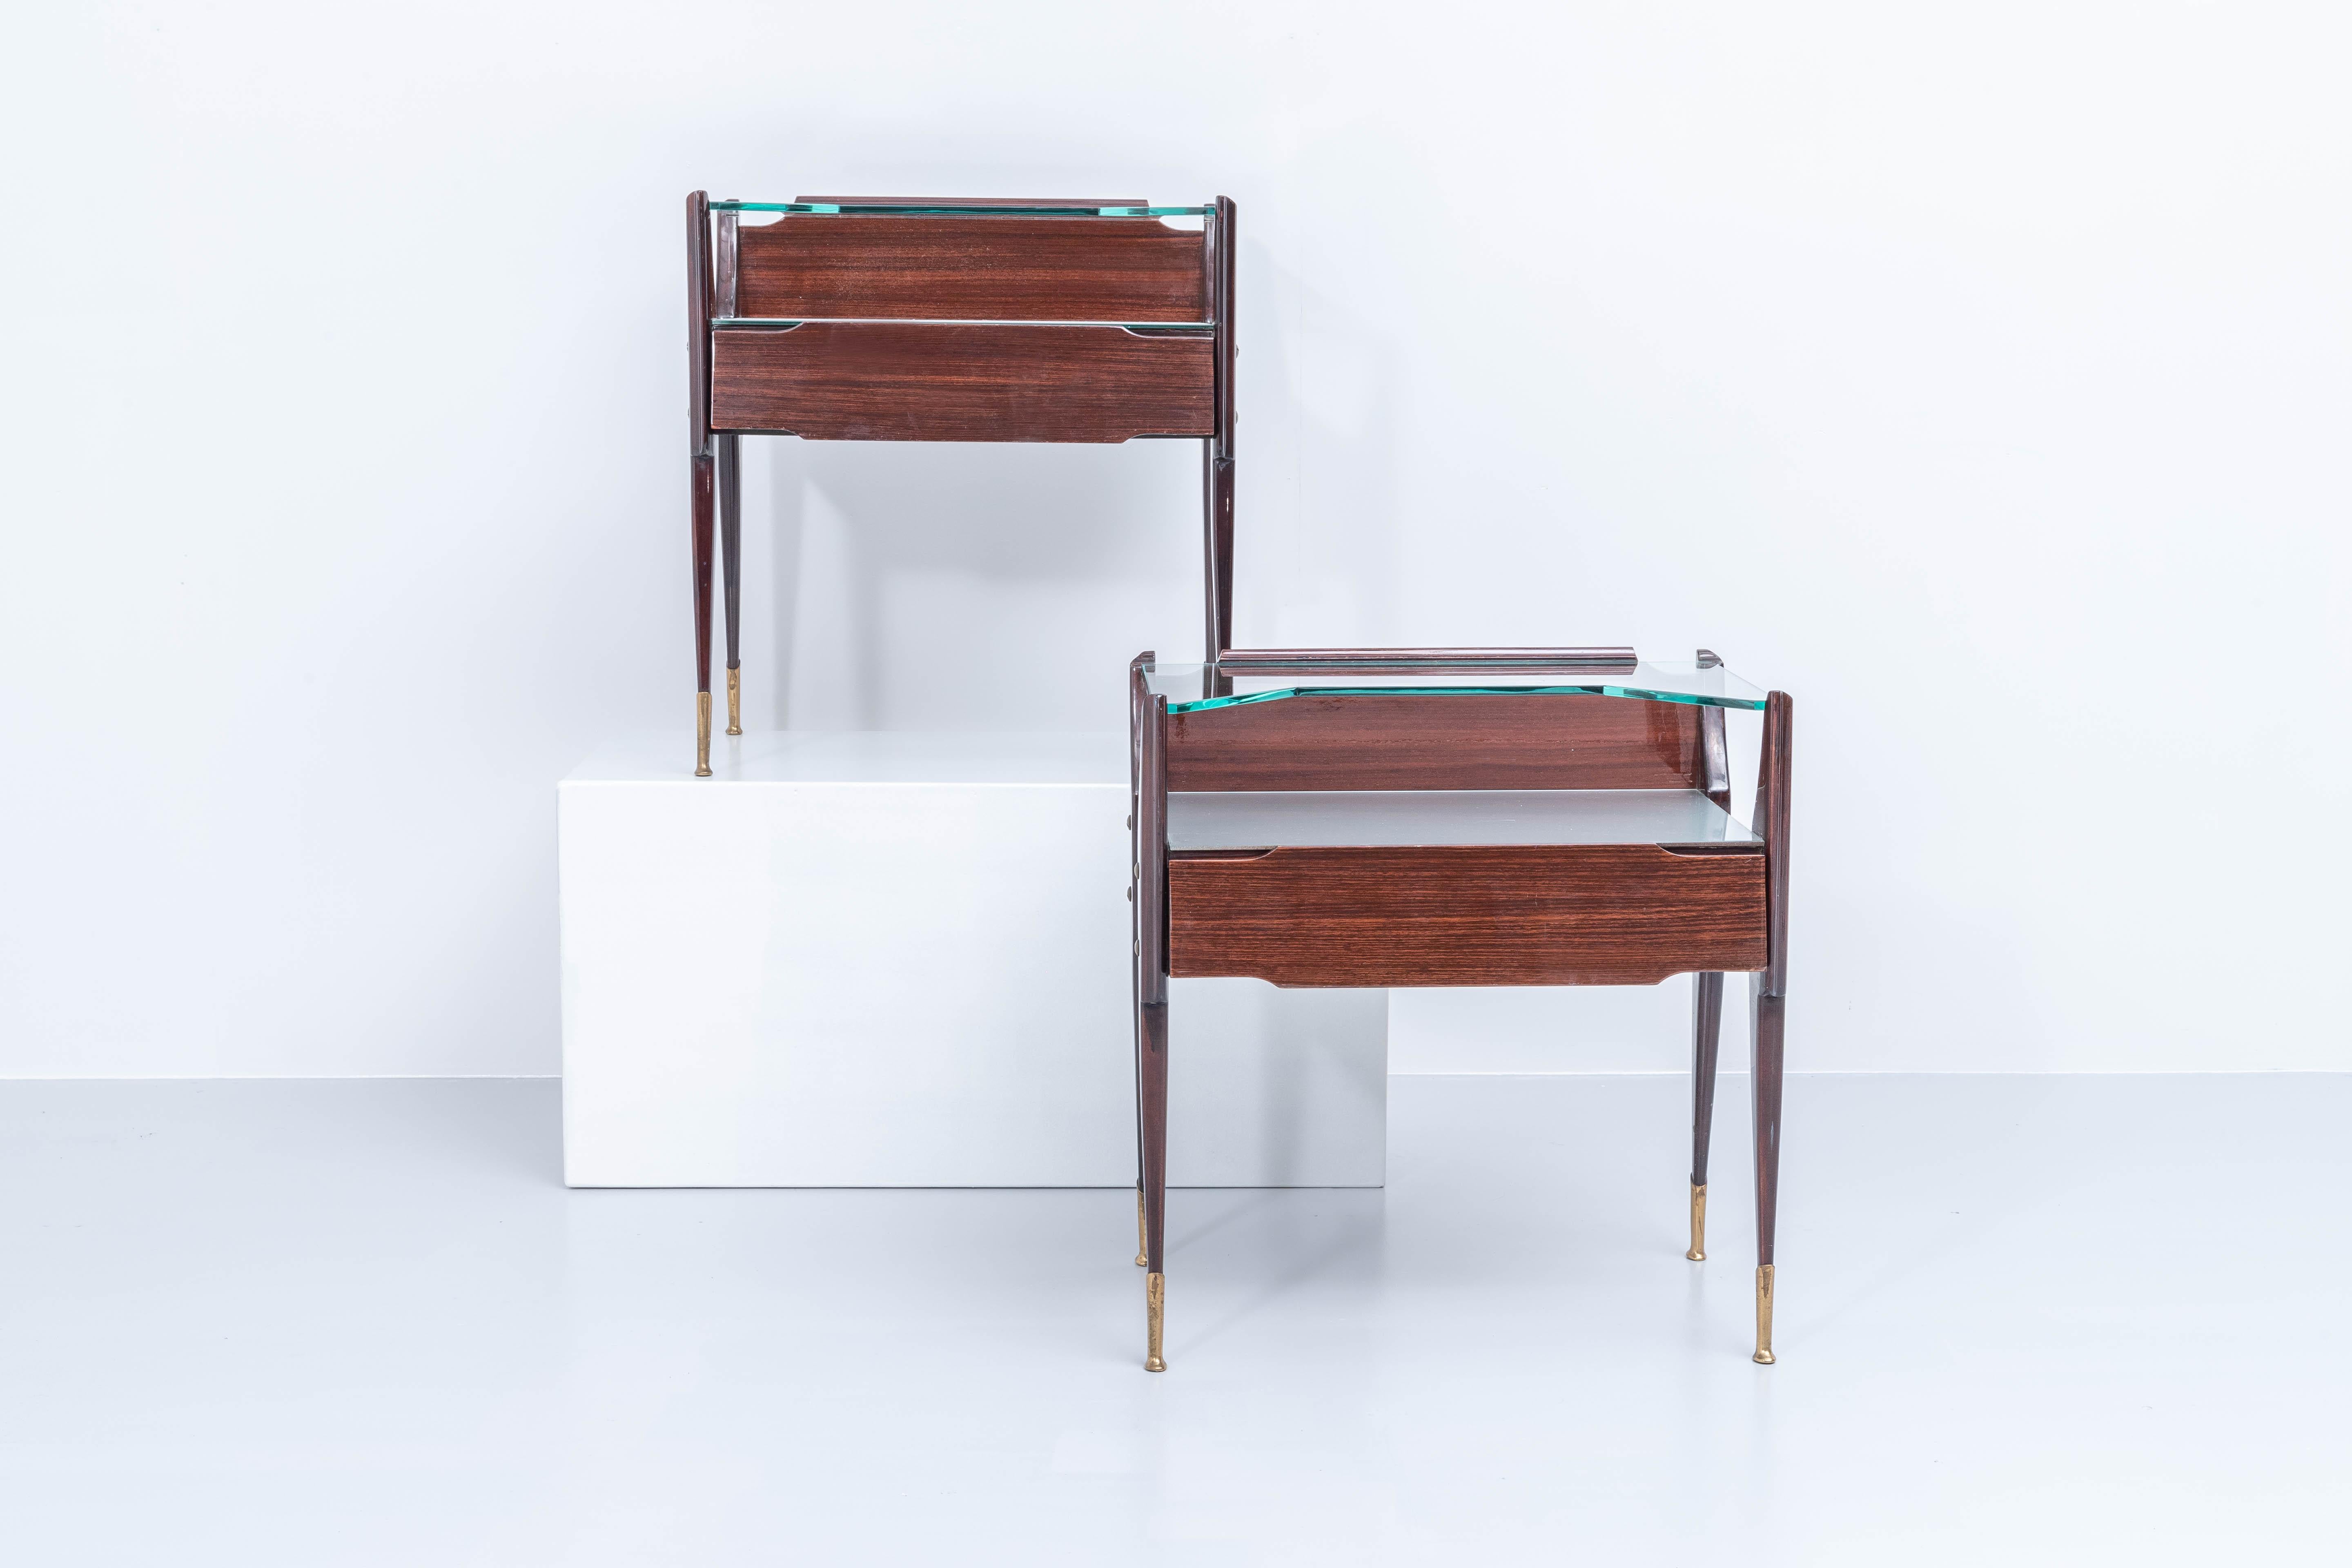 Very elegantly executed set night stands by La permanente mobili Cantù in dark lacquered wood, cut glass and with nicely detailed brass feet. What stands out are the shapes of the nightstands and the materials that were used. There is a double layer